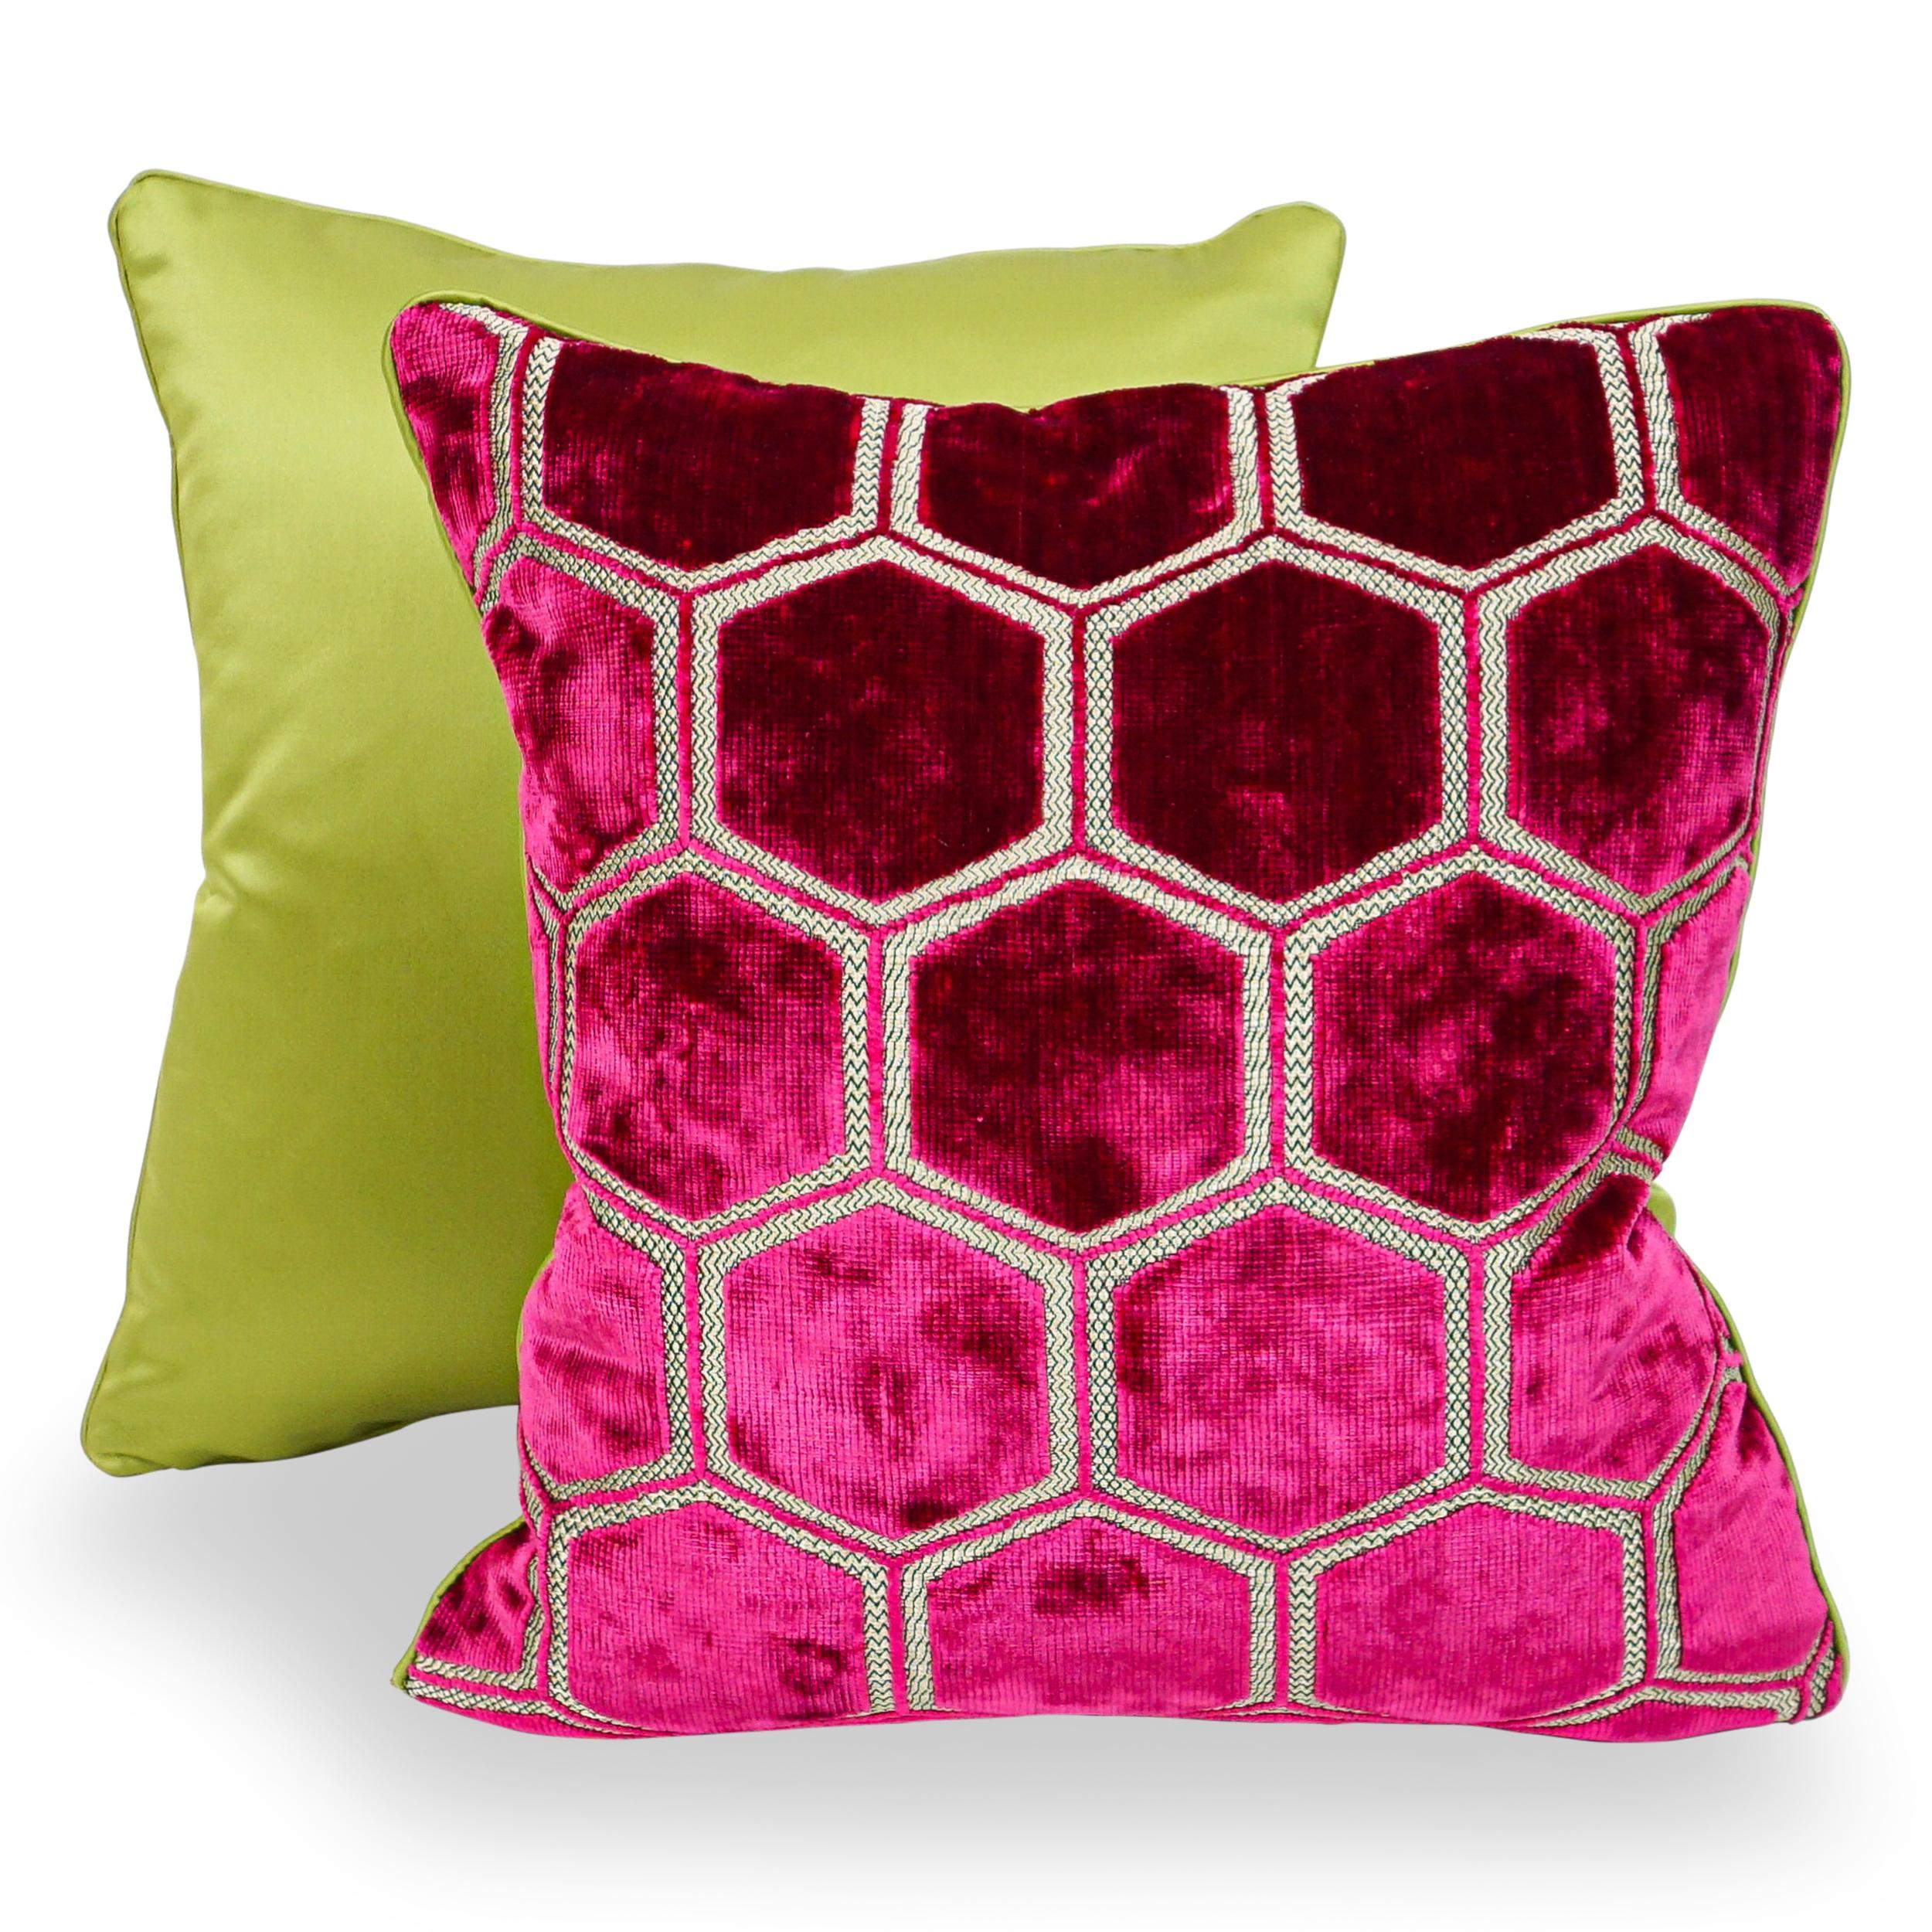 Fuchsia Hexagonal Cut Velvet Square Pillows with Chartreuse Sateen Back For Sale 3